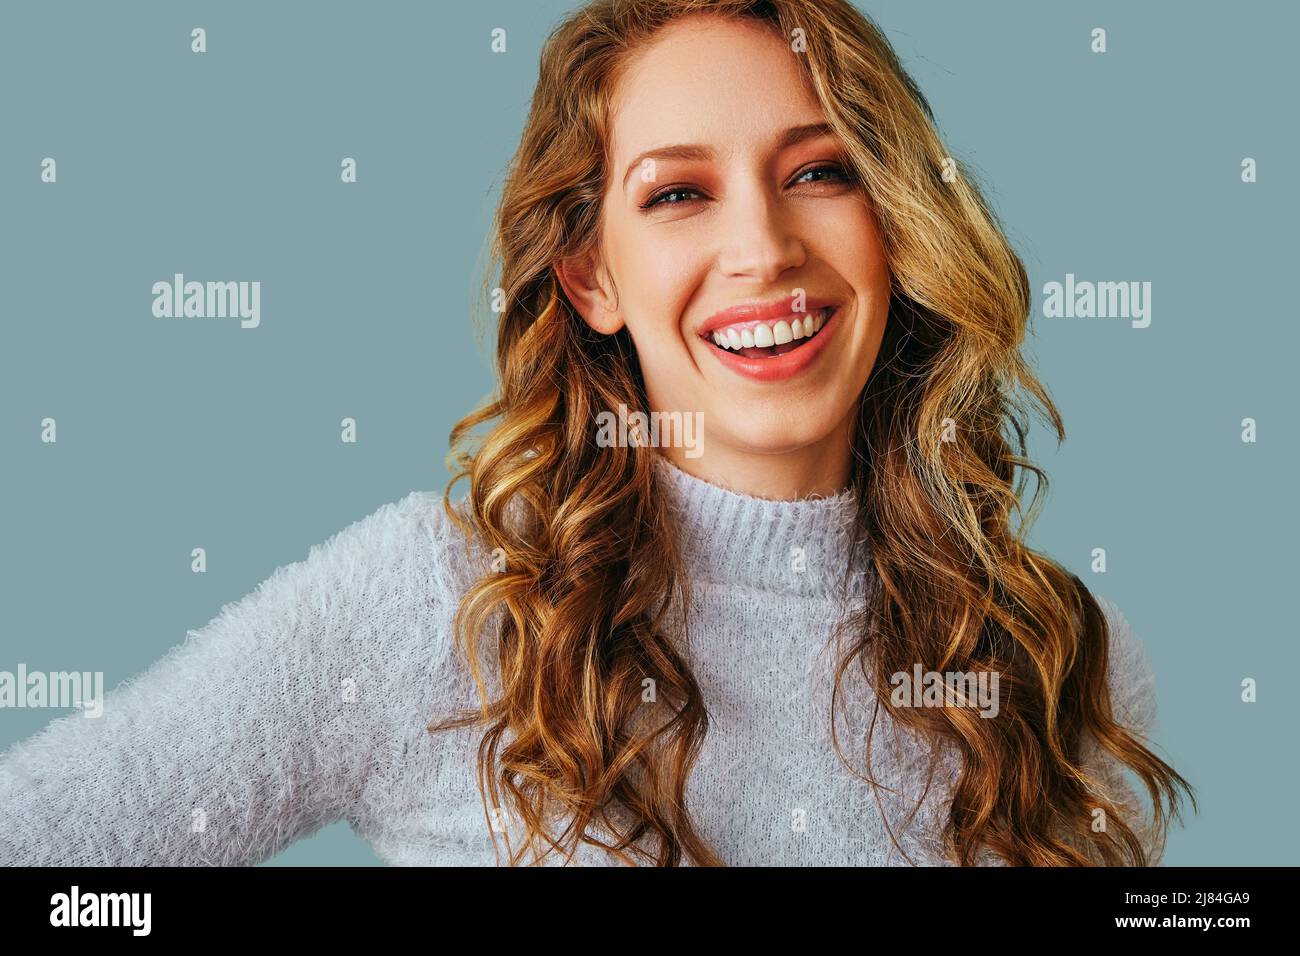 horizontal portrait of beautiful young adult smiling woman with long curly hair studio Stock Photo